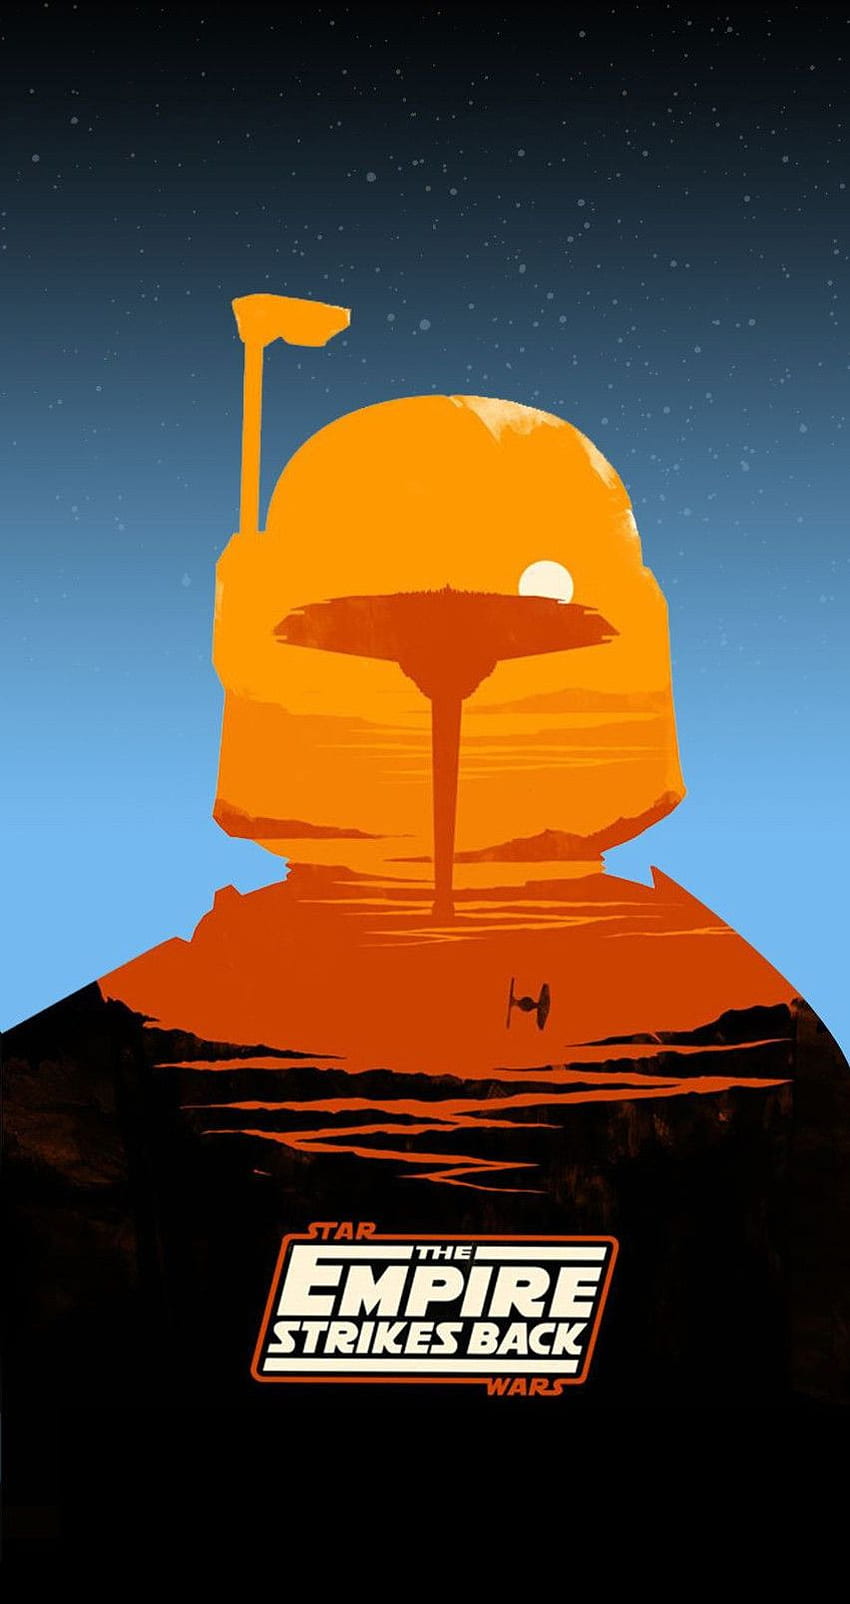 10 Cool Star Wars wallpapers for iPhone in 2023 Free HD download   iGeeksBlog